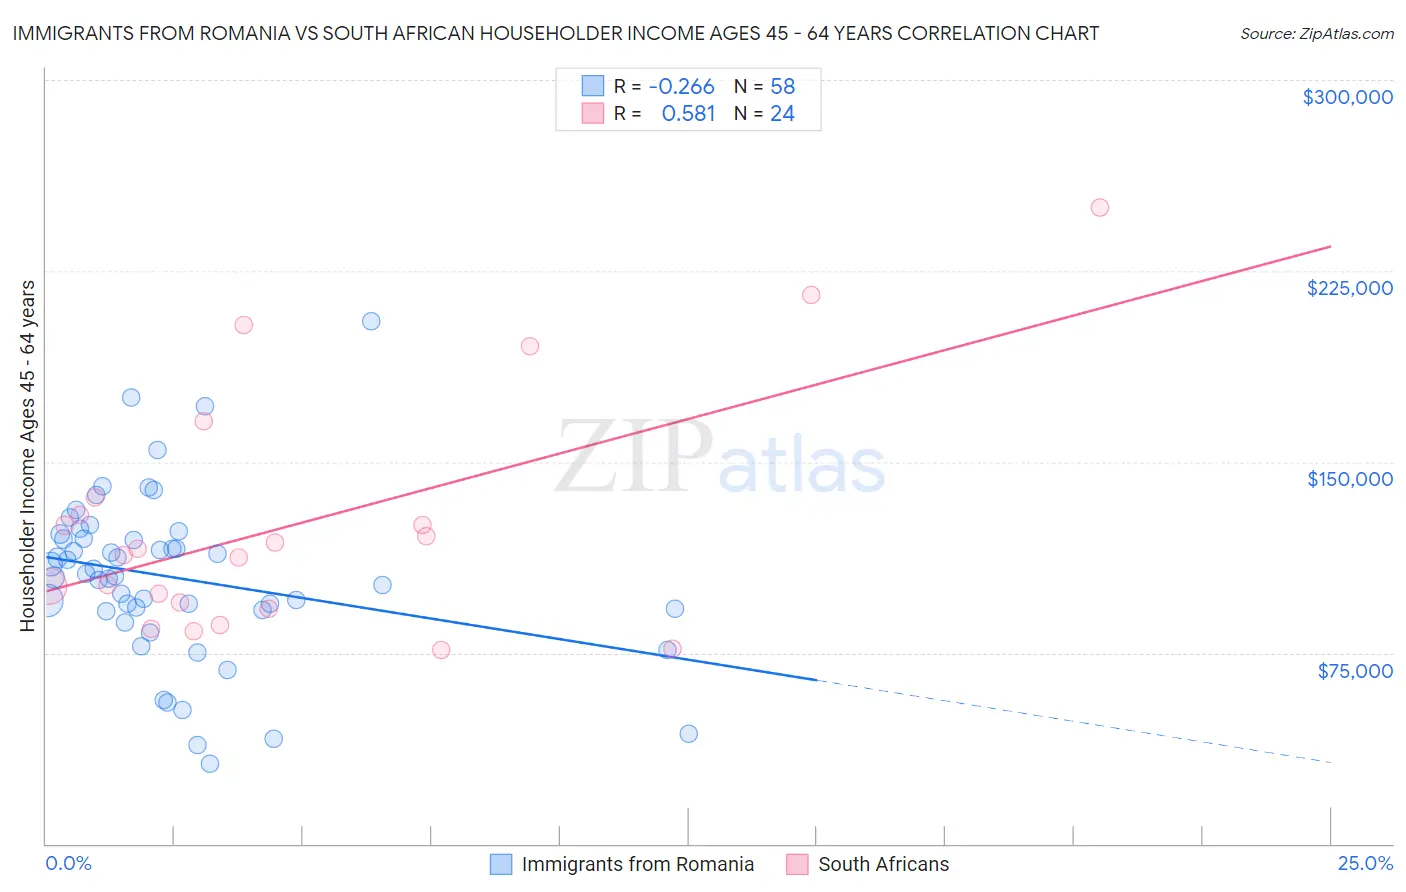 Immigrants from Romania vs South African Householder Income Ages 45 - 64 years